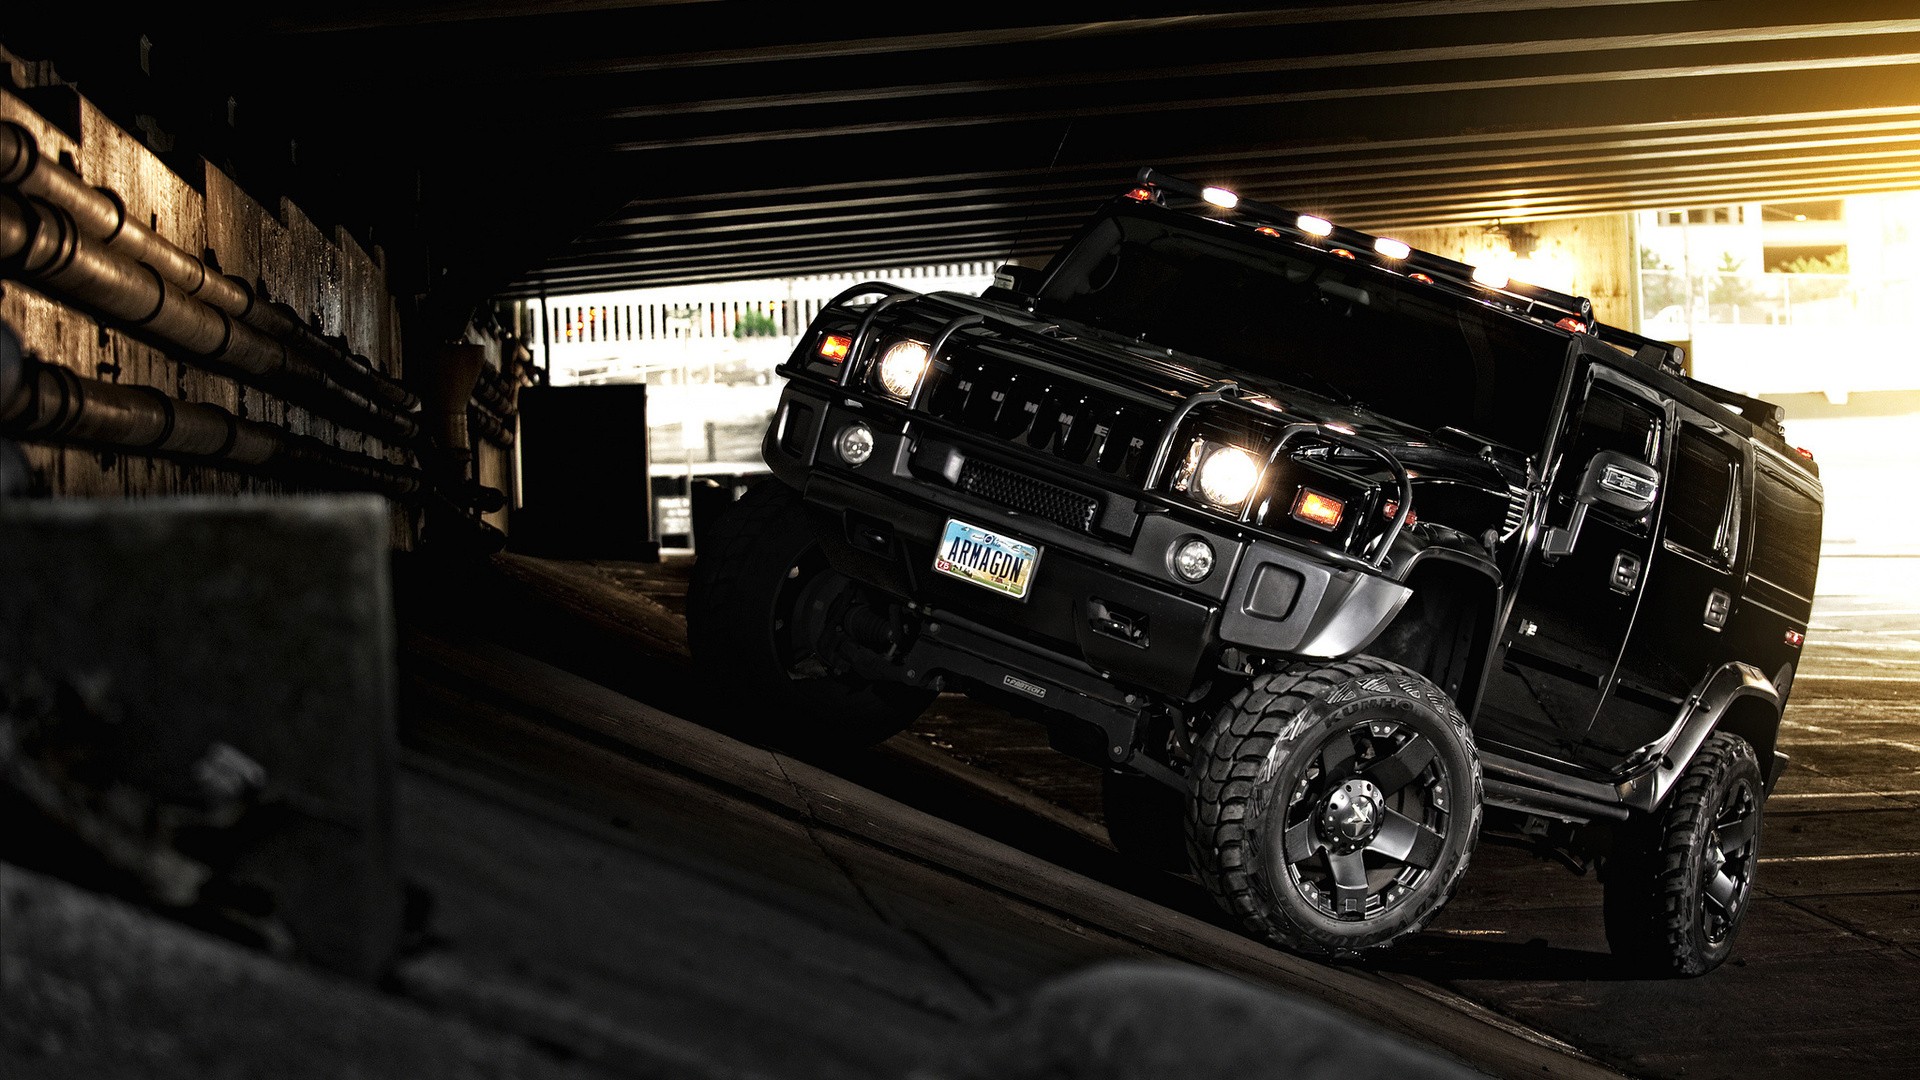 Download Hummer wallpapers for mobile phone free Hummer HD pictures